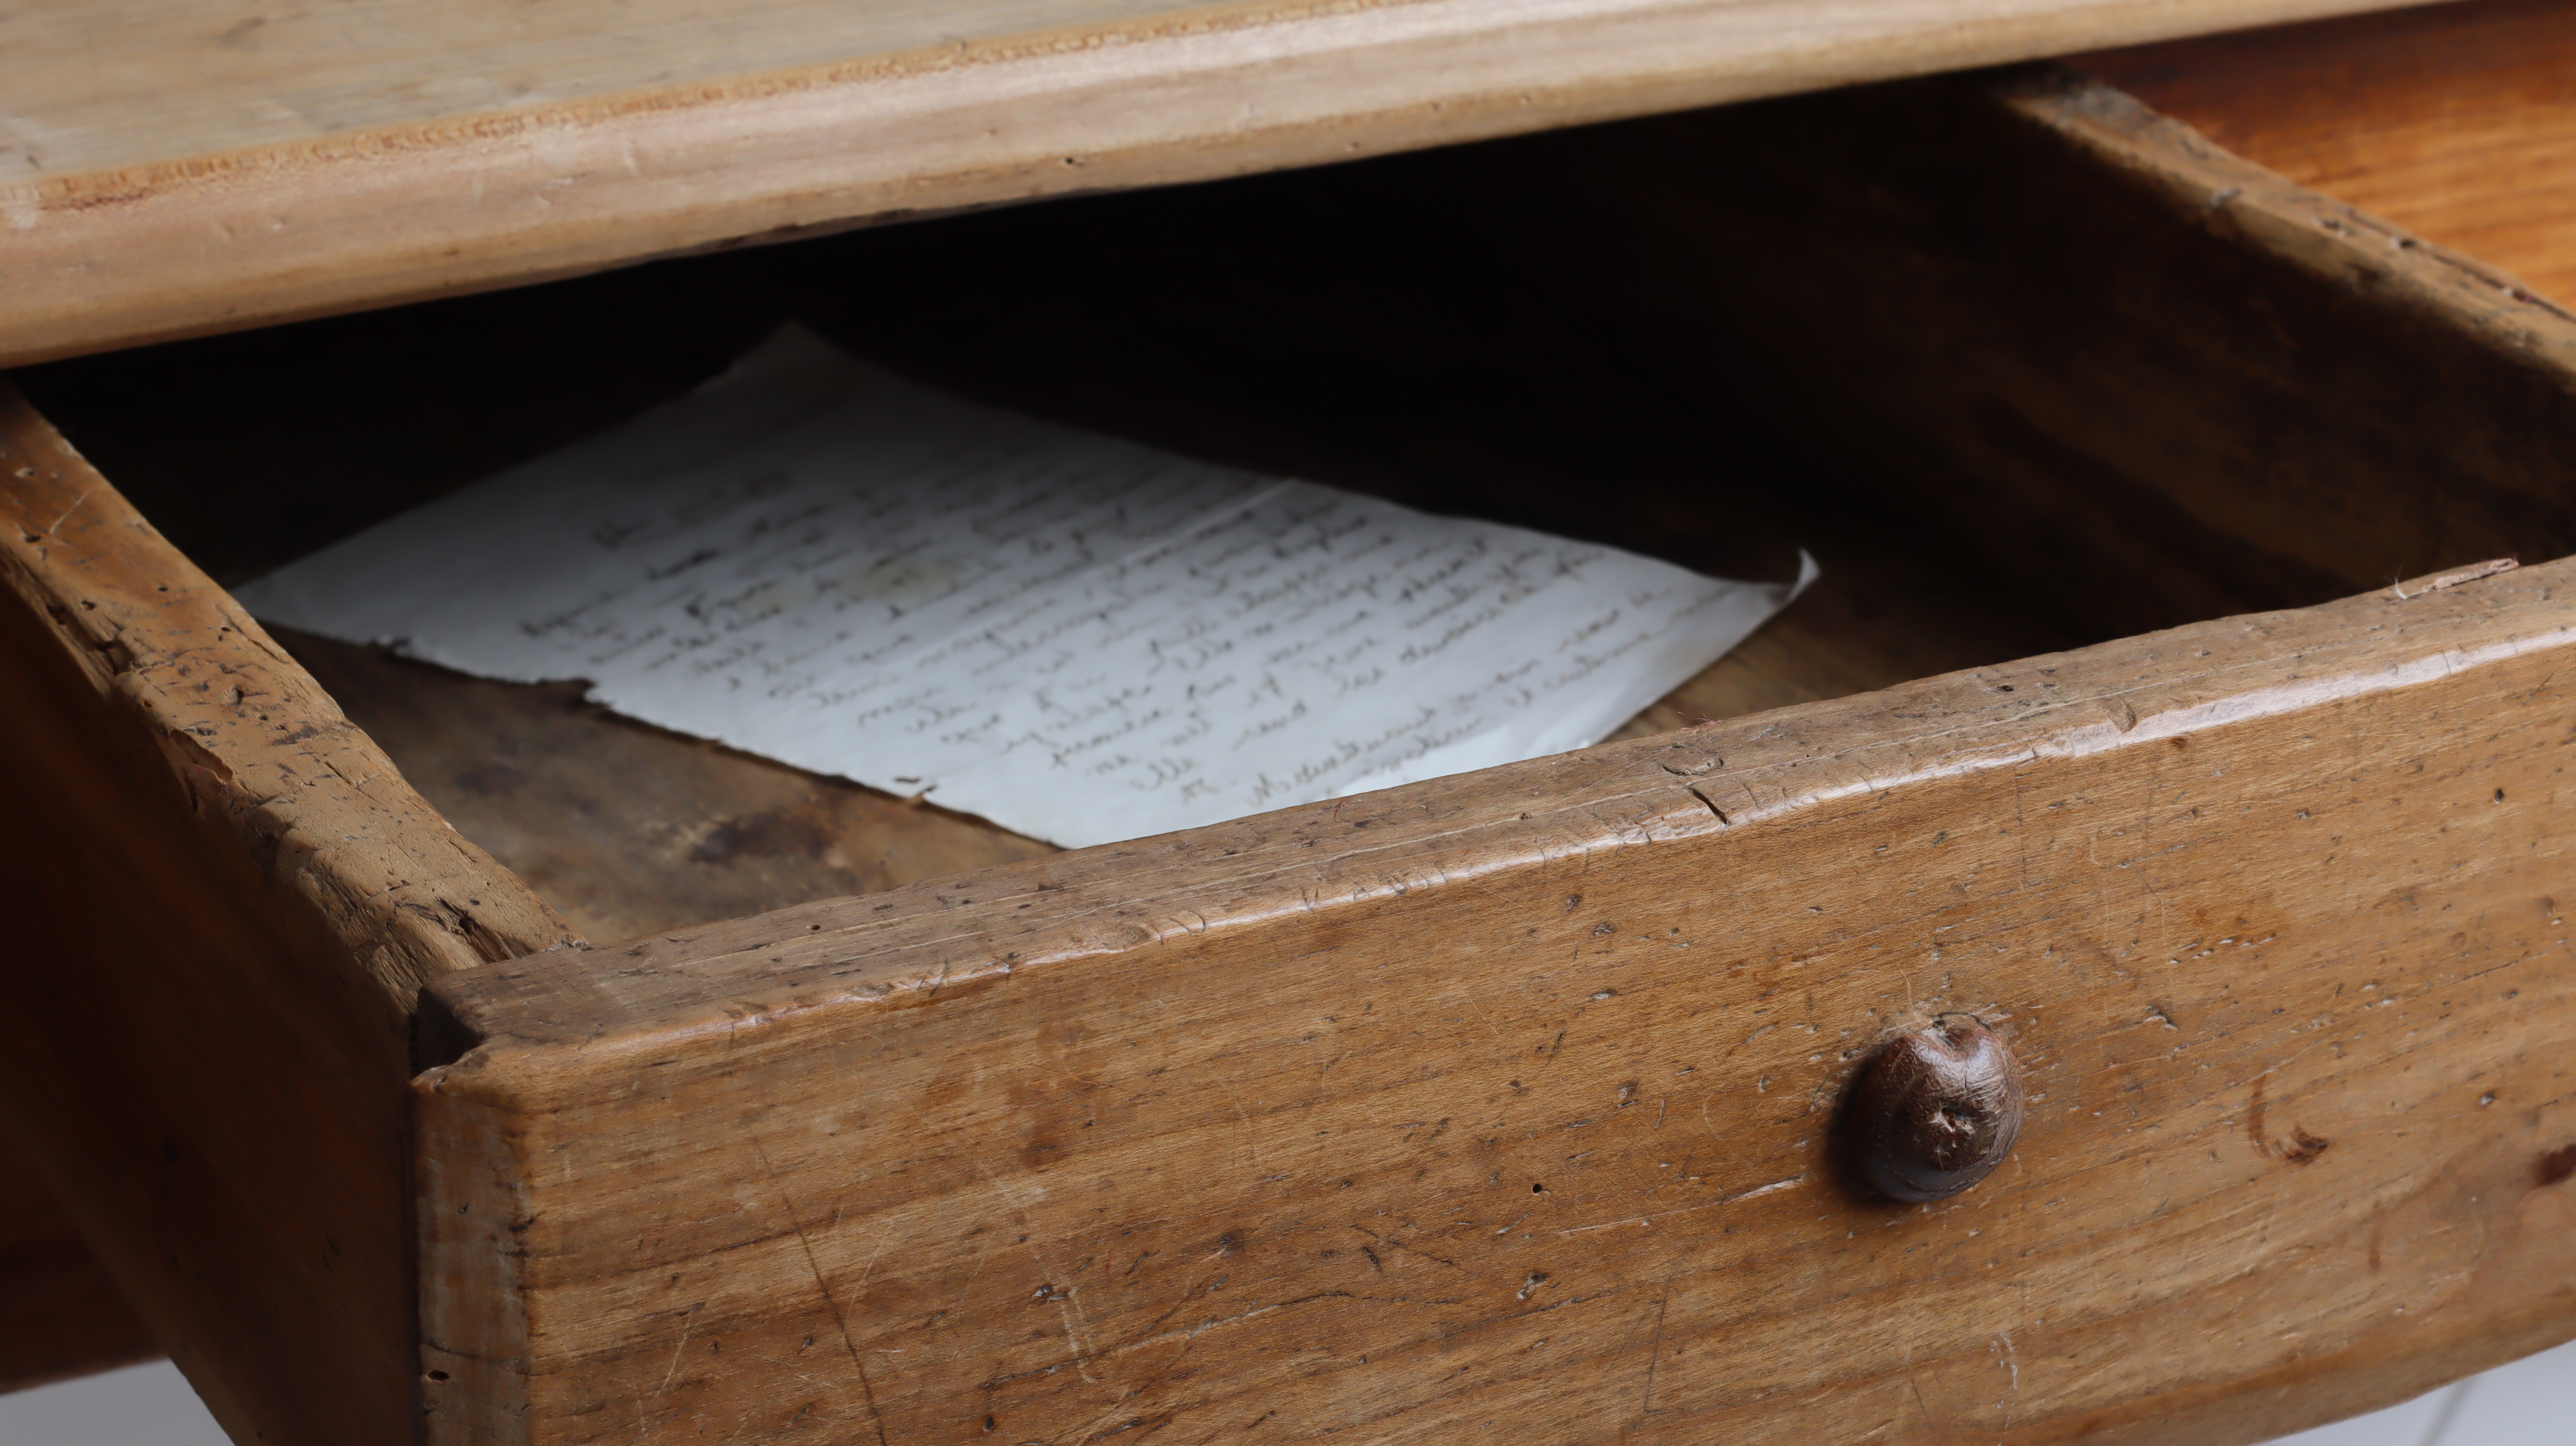 Half-open drawer of old vintage wooden table with an old handwritten letter inside | Source: Shutterstock